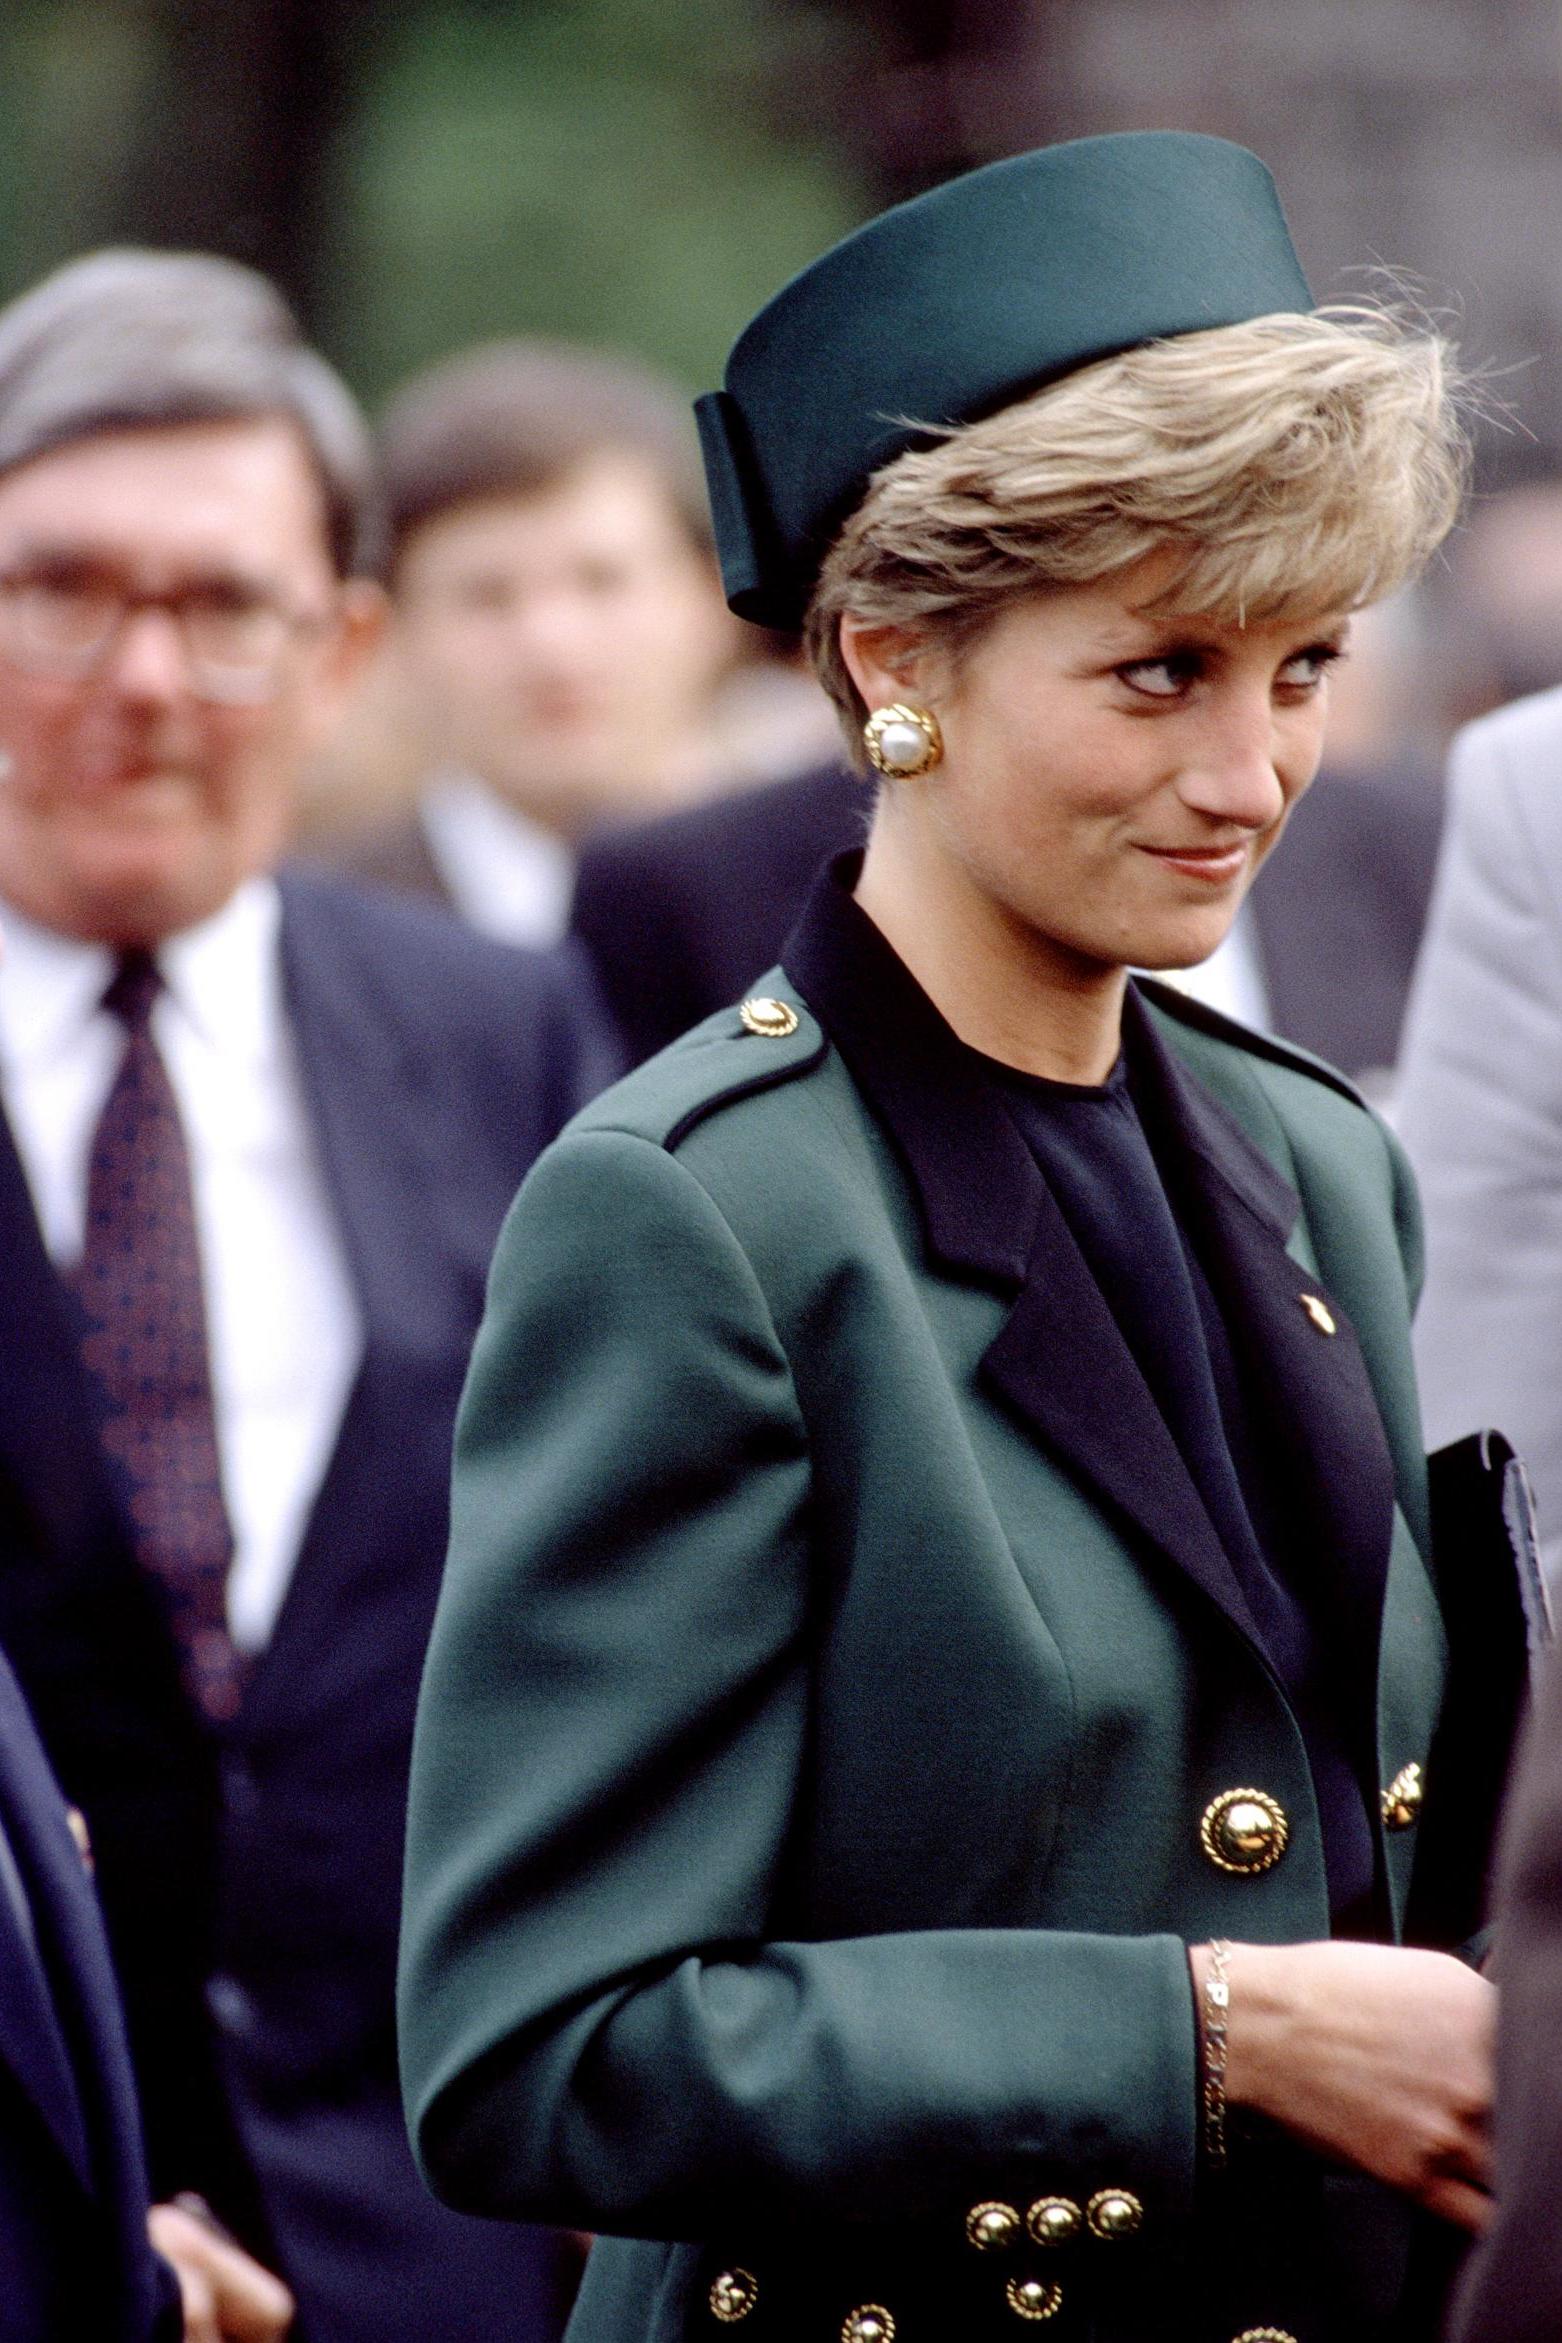 The late Princess Diana wore an olive green military-style suit on an official visit to Czechoslovakia in 1991.